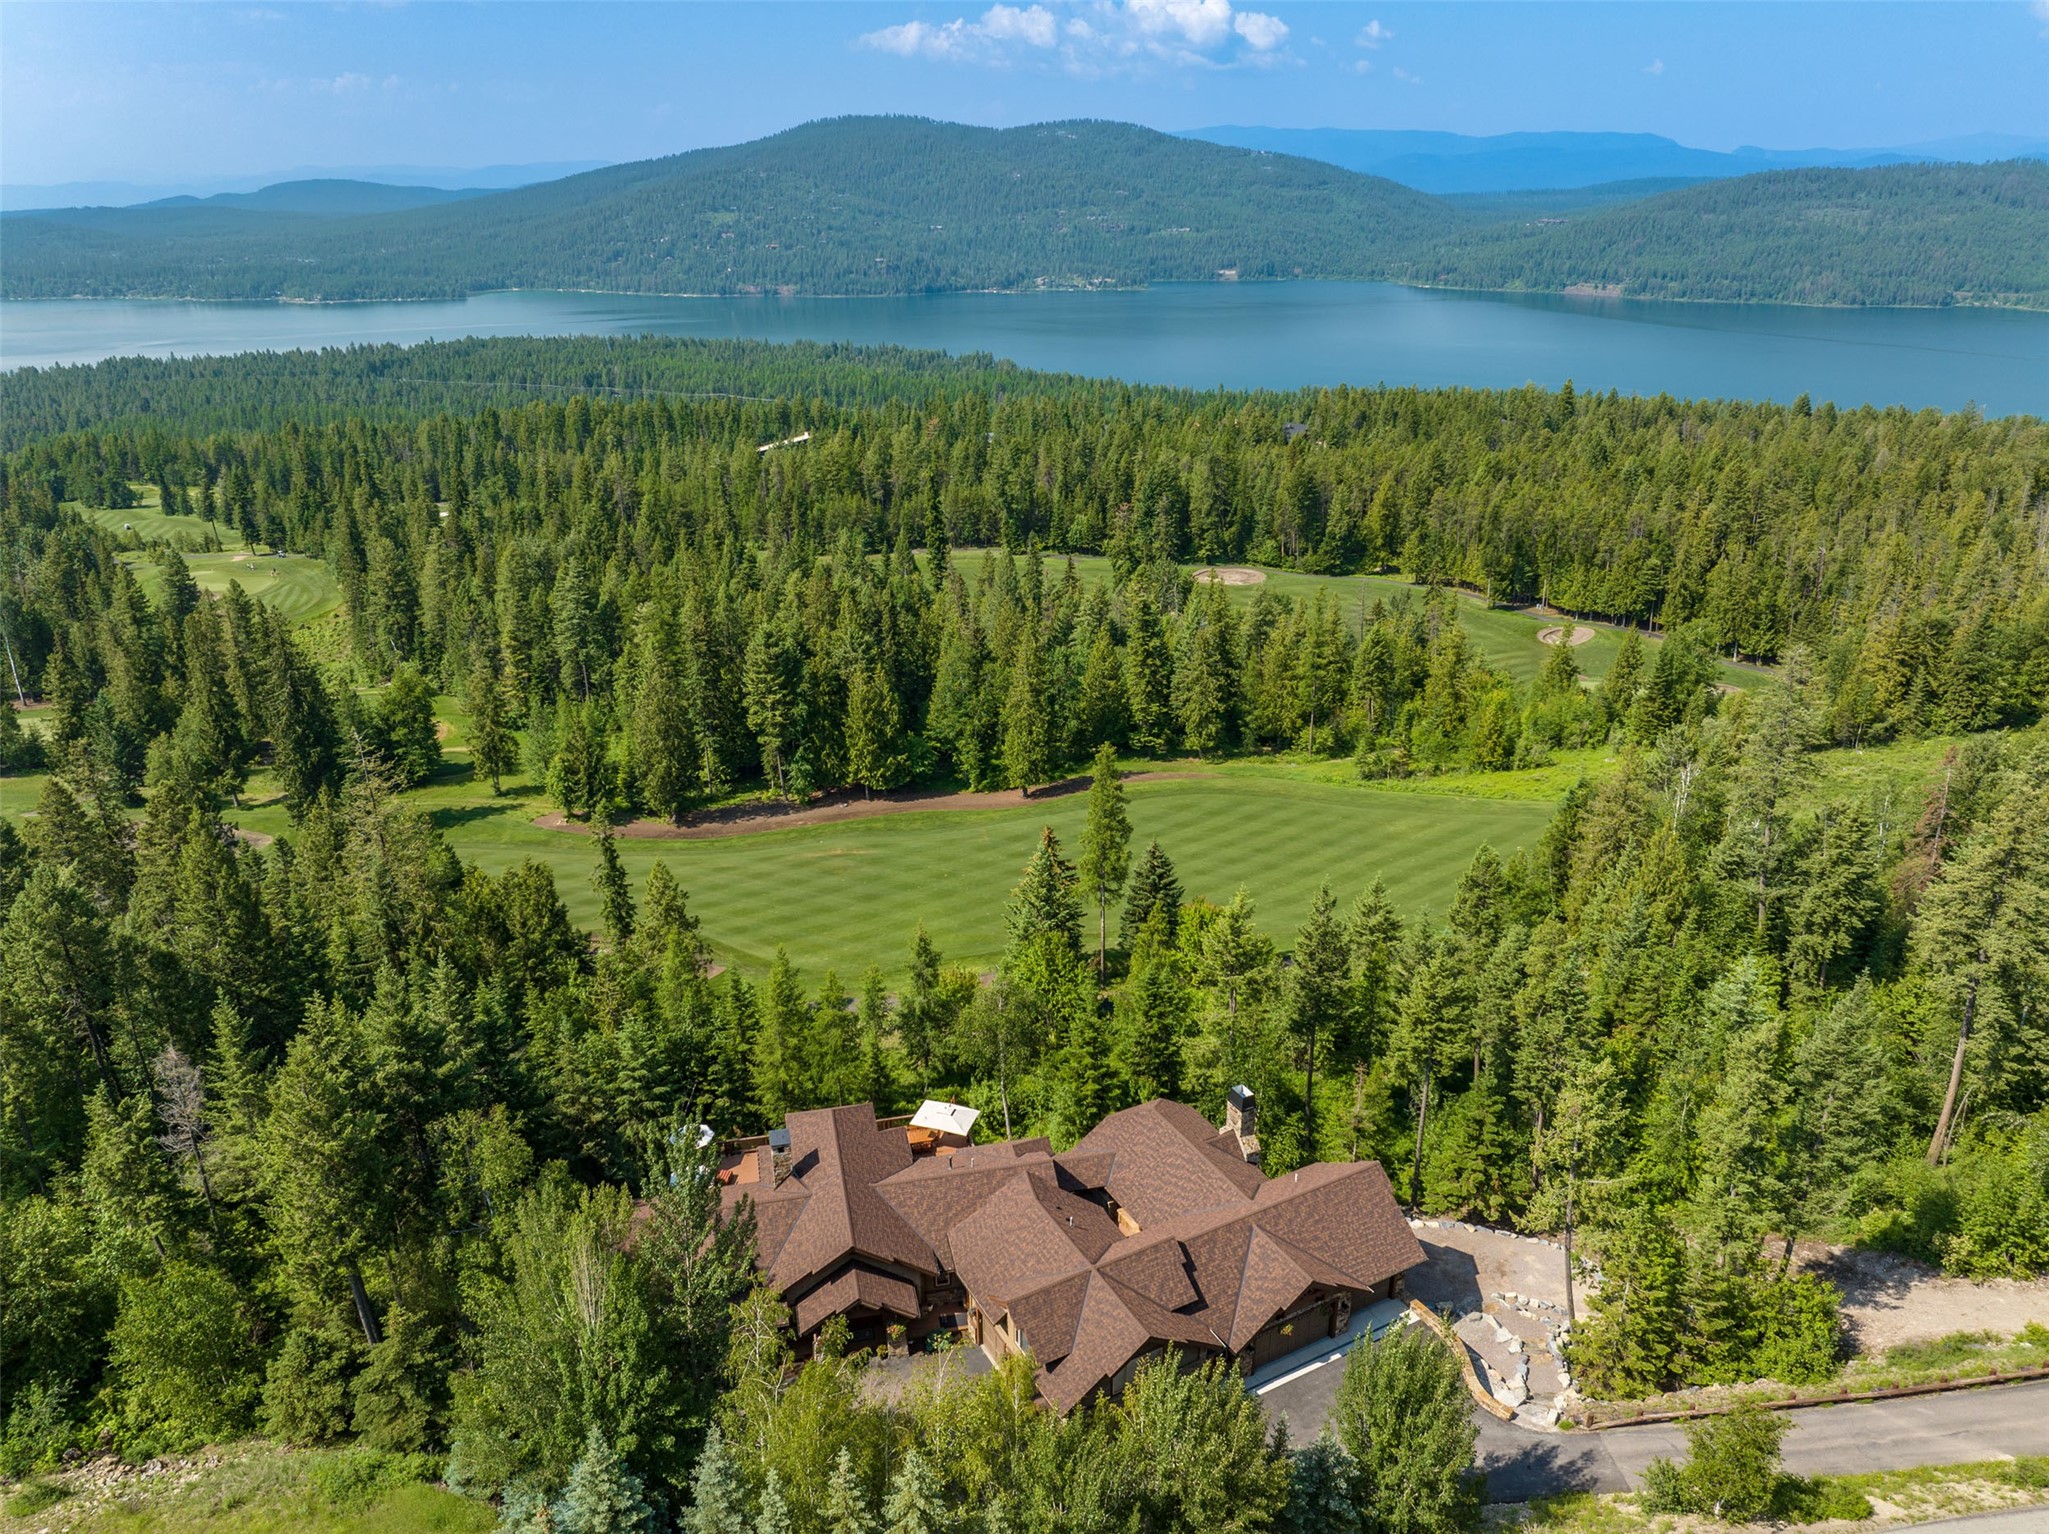 A rare find in the exclusive Iron Horse community…enjoy 1.53 acres of privacy overlooking the 13th fairway of the Tom Fazio-designed golf course with stunning views of Whitefish Lake. Built in 2000, this property has been extensively remodeled throughout and just completed an additional covered deck and 3 car garage for a total of 2 garages with 5 spaces. The main home is an elegant 5,819 sq ft with 3 large bedroom suites plus 2 additional powder rooms. The 4th bedroom suite sits on its own with a private entrance above the garage. The original deck off the great room was replaced with trex decking and heavily reinforced, the additional deck is covered and features a fireplace, built-in Evo cooktop, and grill. Offered fully furnished, turn-key with some seller exclusions. See the property features sheet for more details. Contact Stephanie Skinner, 406-261-8430, or your real estate professional.